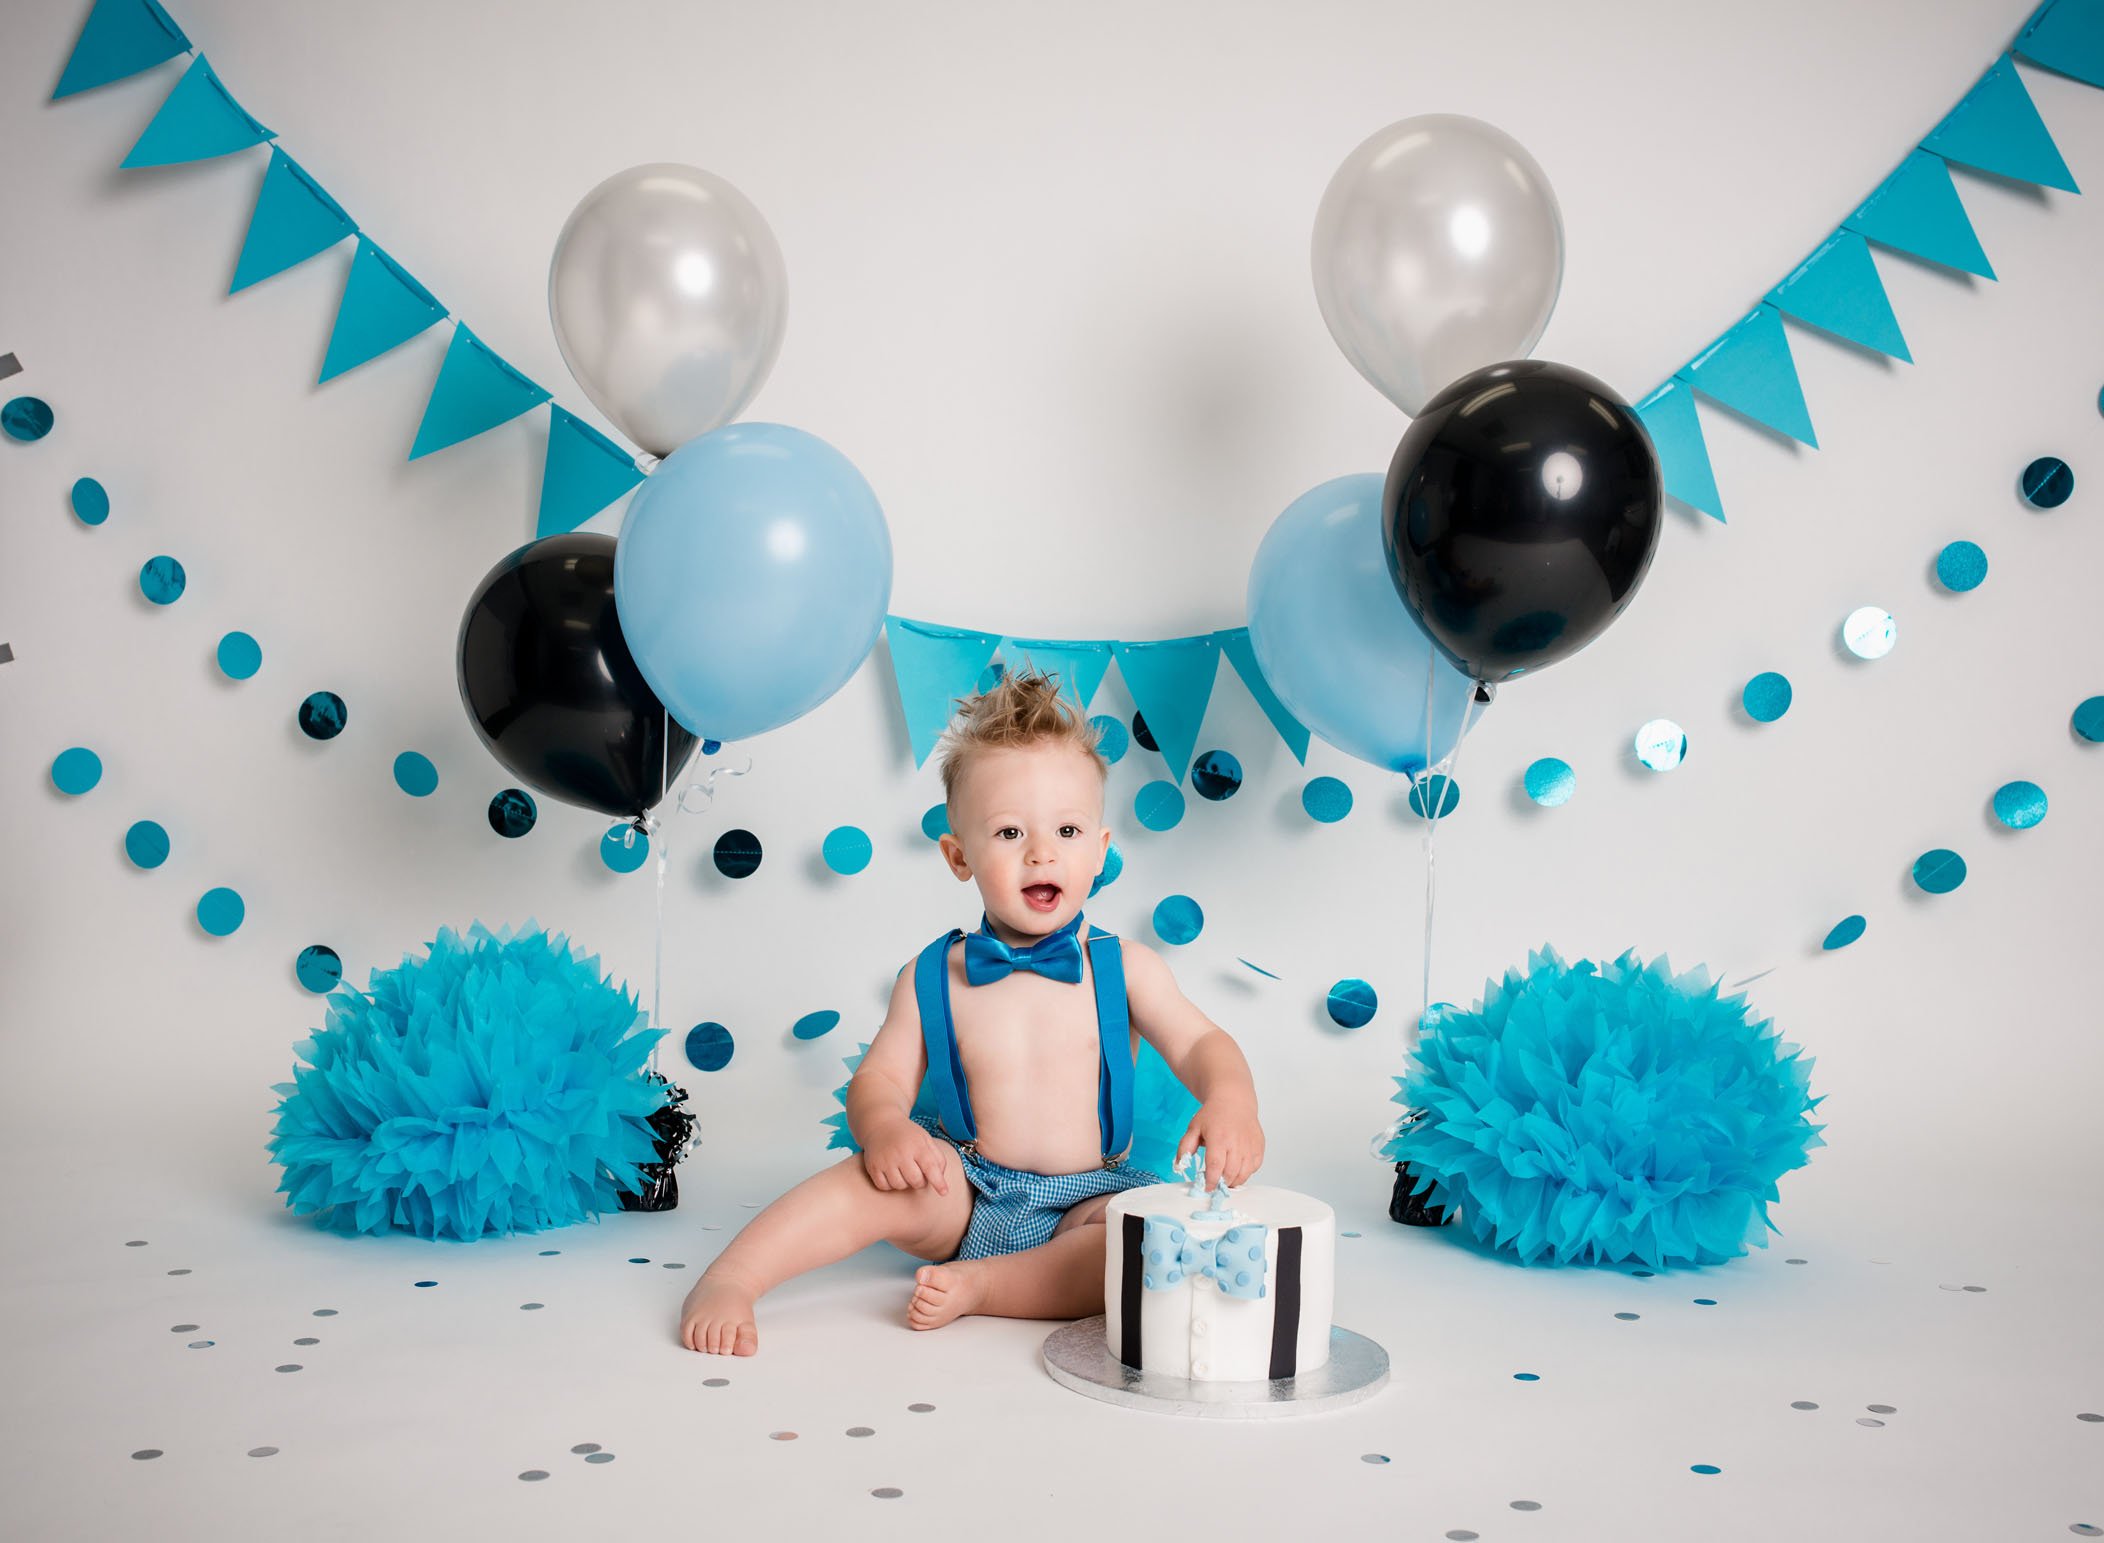 12 month old boy with blue, white and black cake smash session